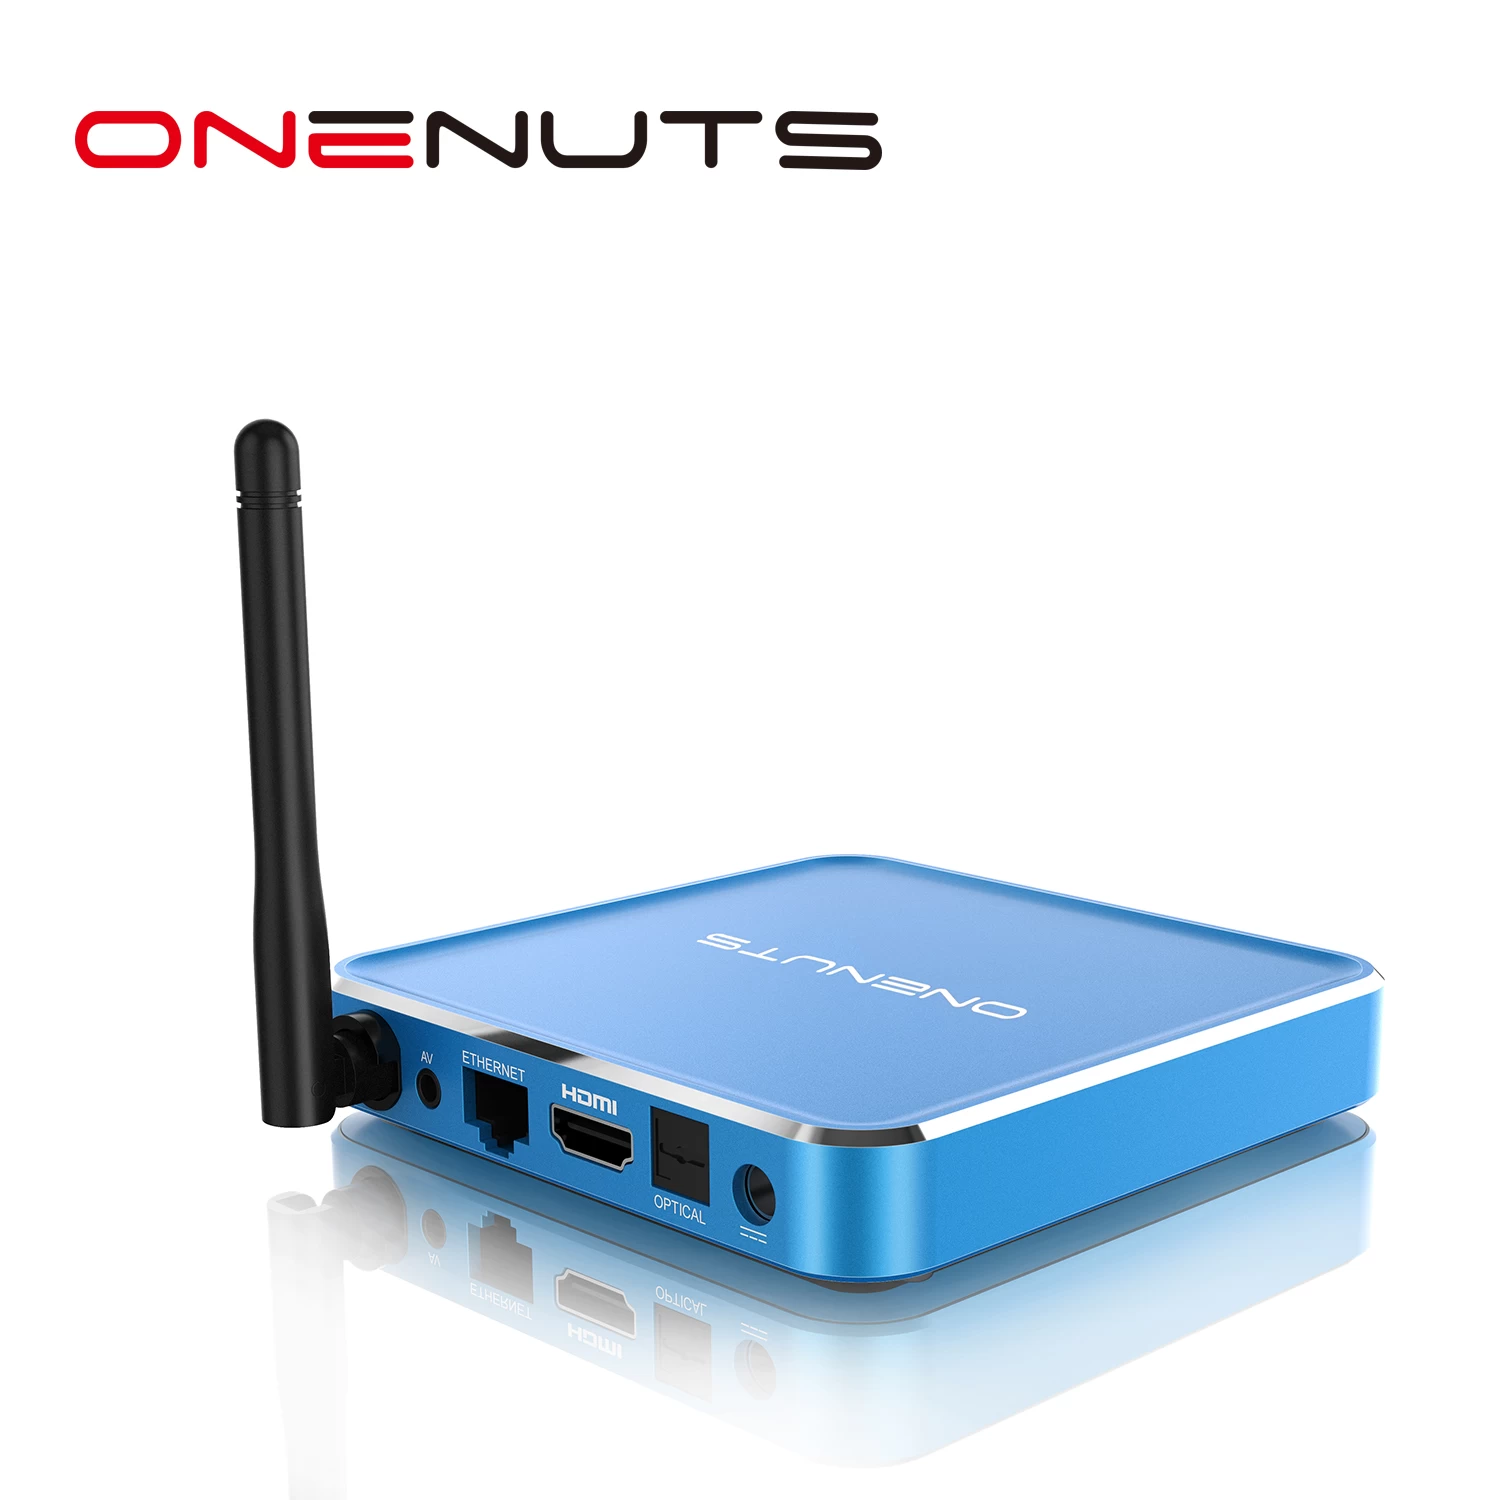 Android TV Box supplier, android smart tv box company